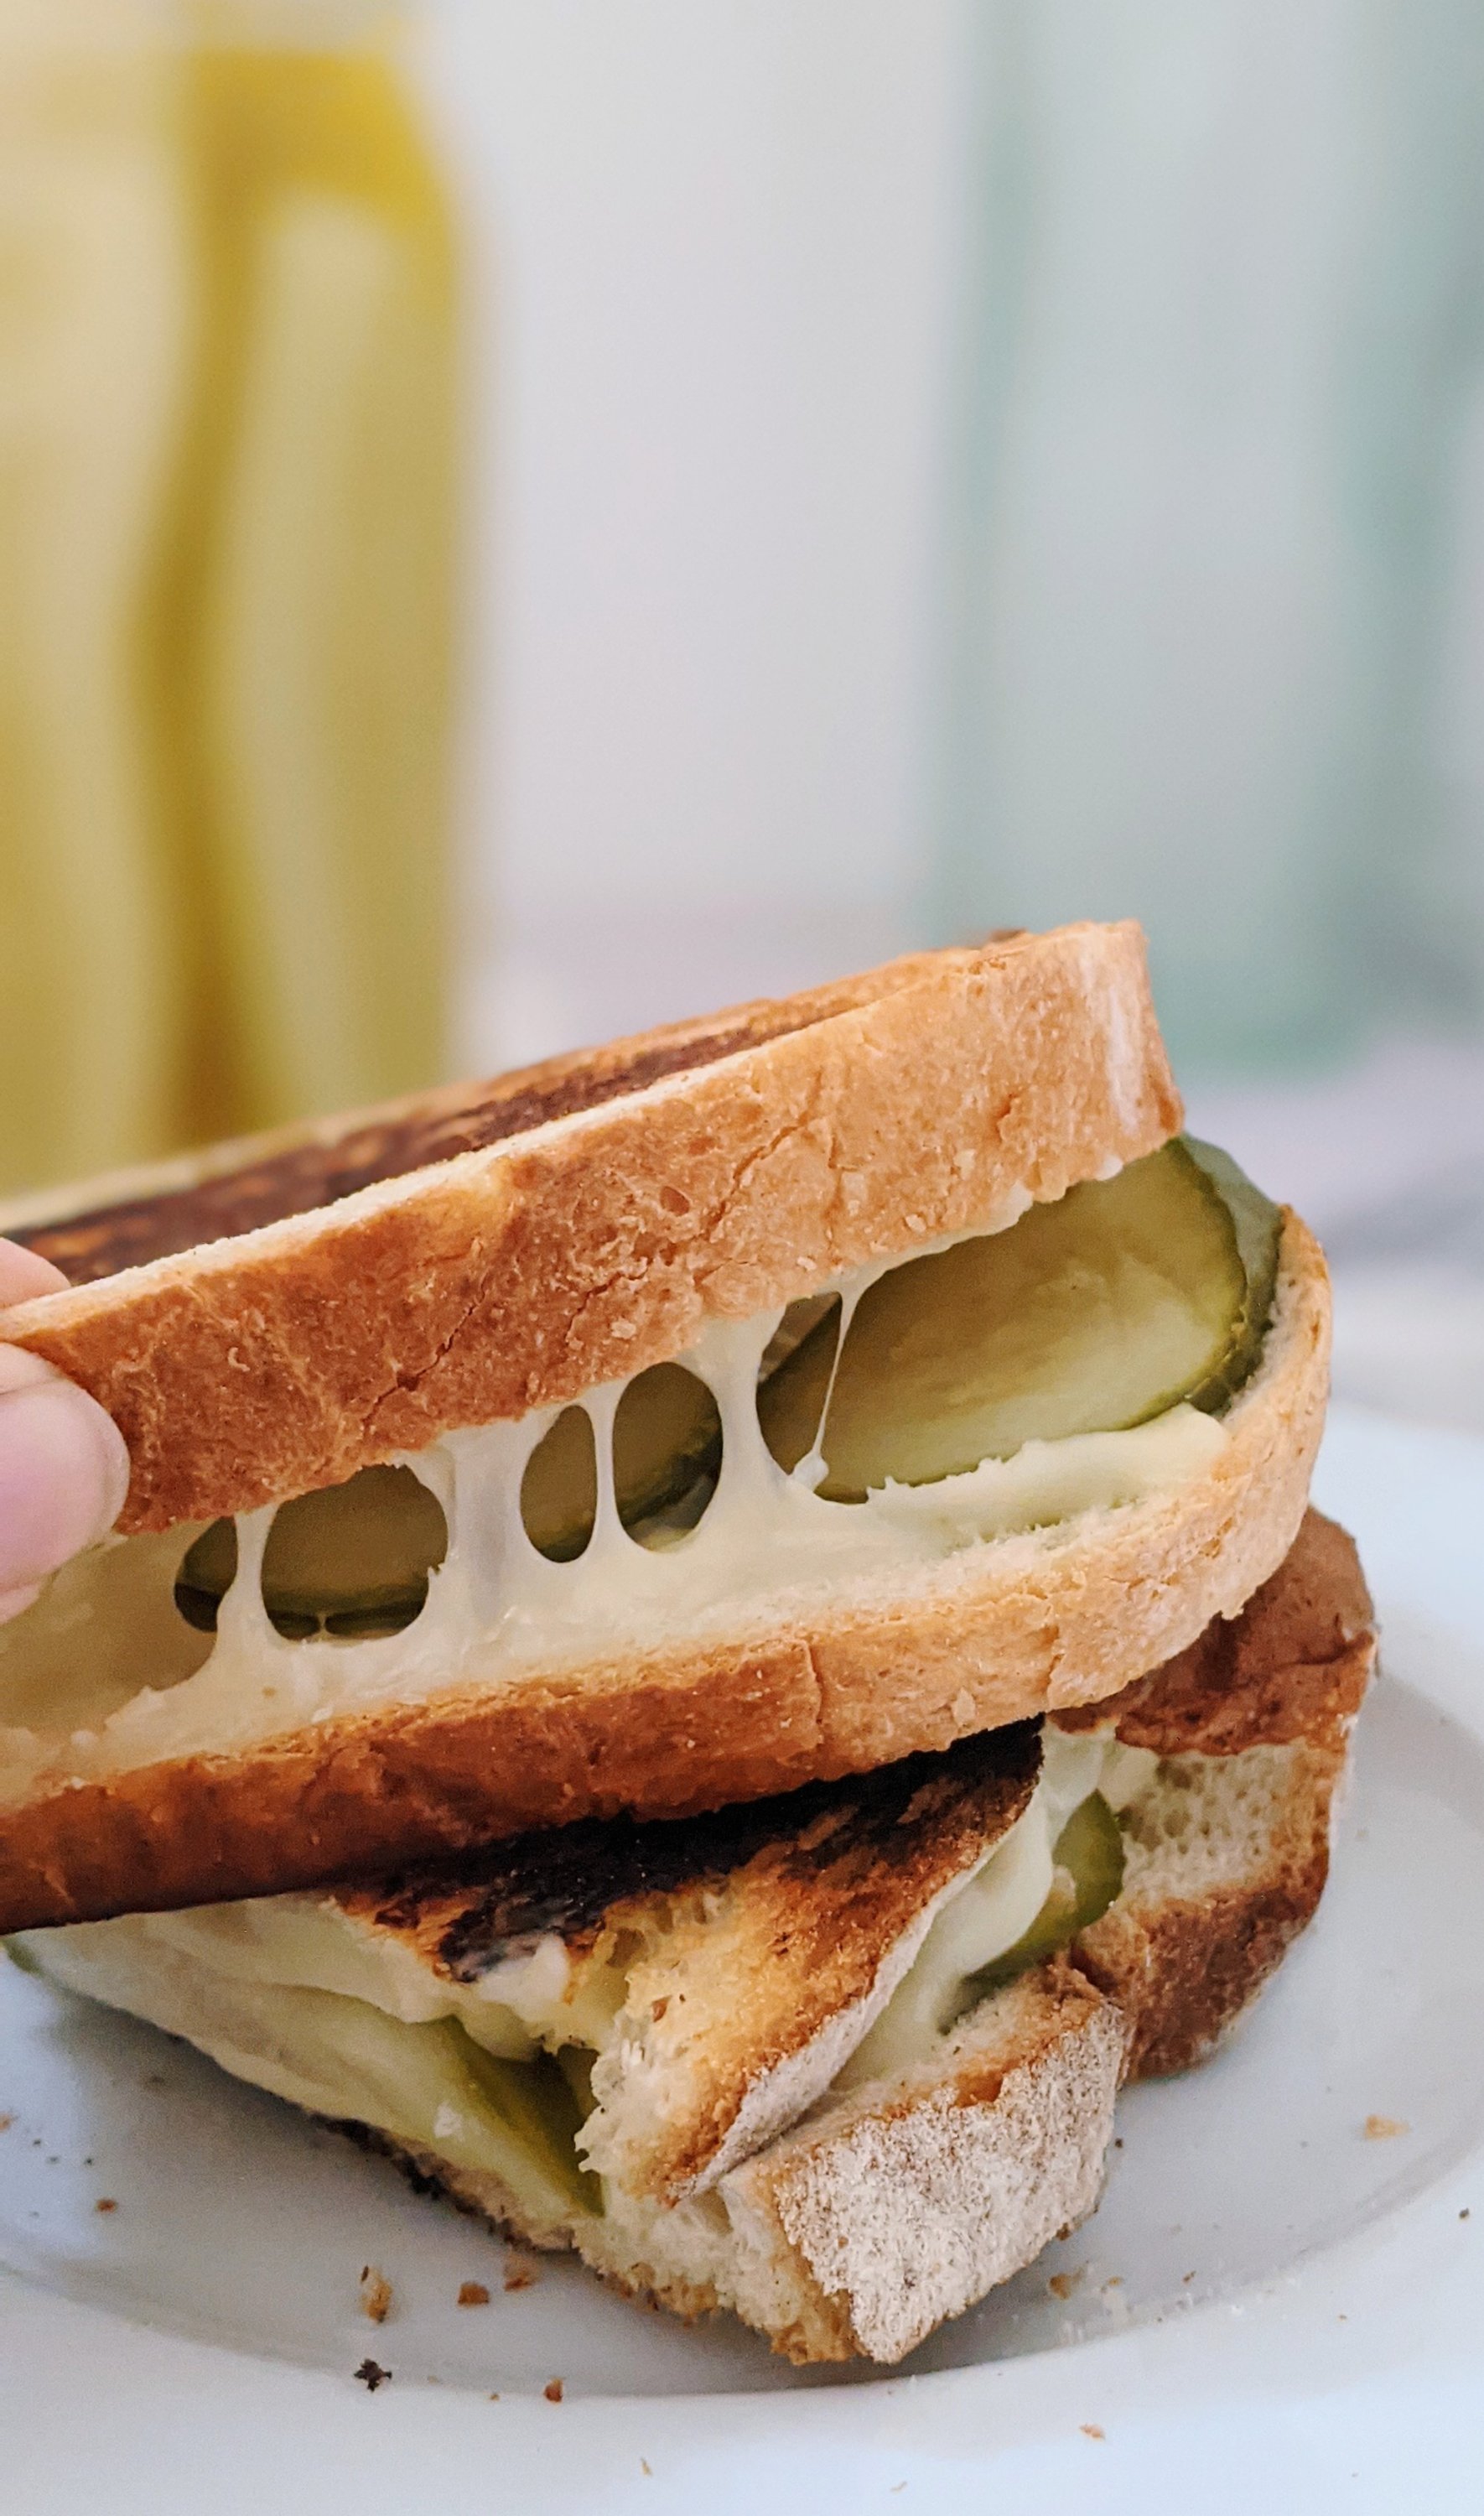 dill pickle grilled cheese recipe vegetarian gluten free ad keto options recipe with pickles for plant based diet low acrb grilled cheese with pickles recipe